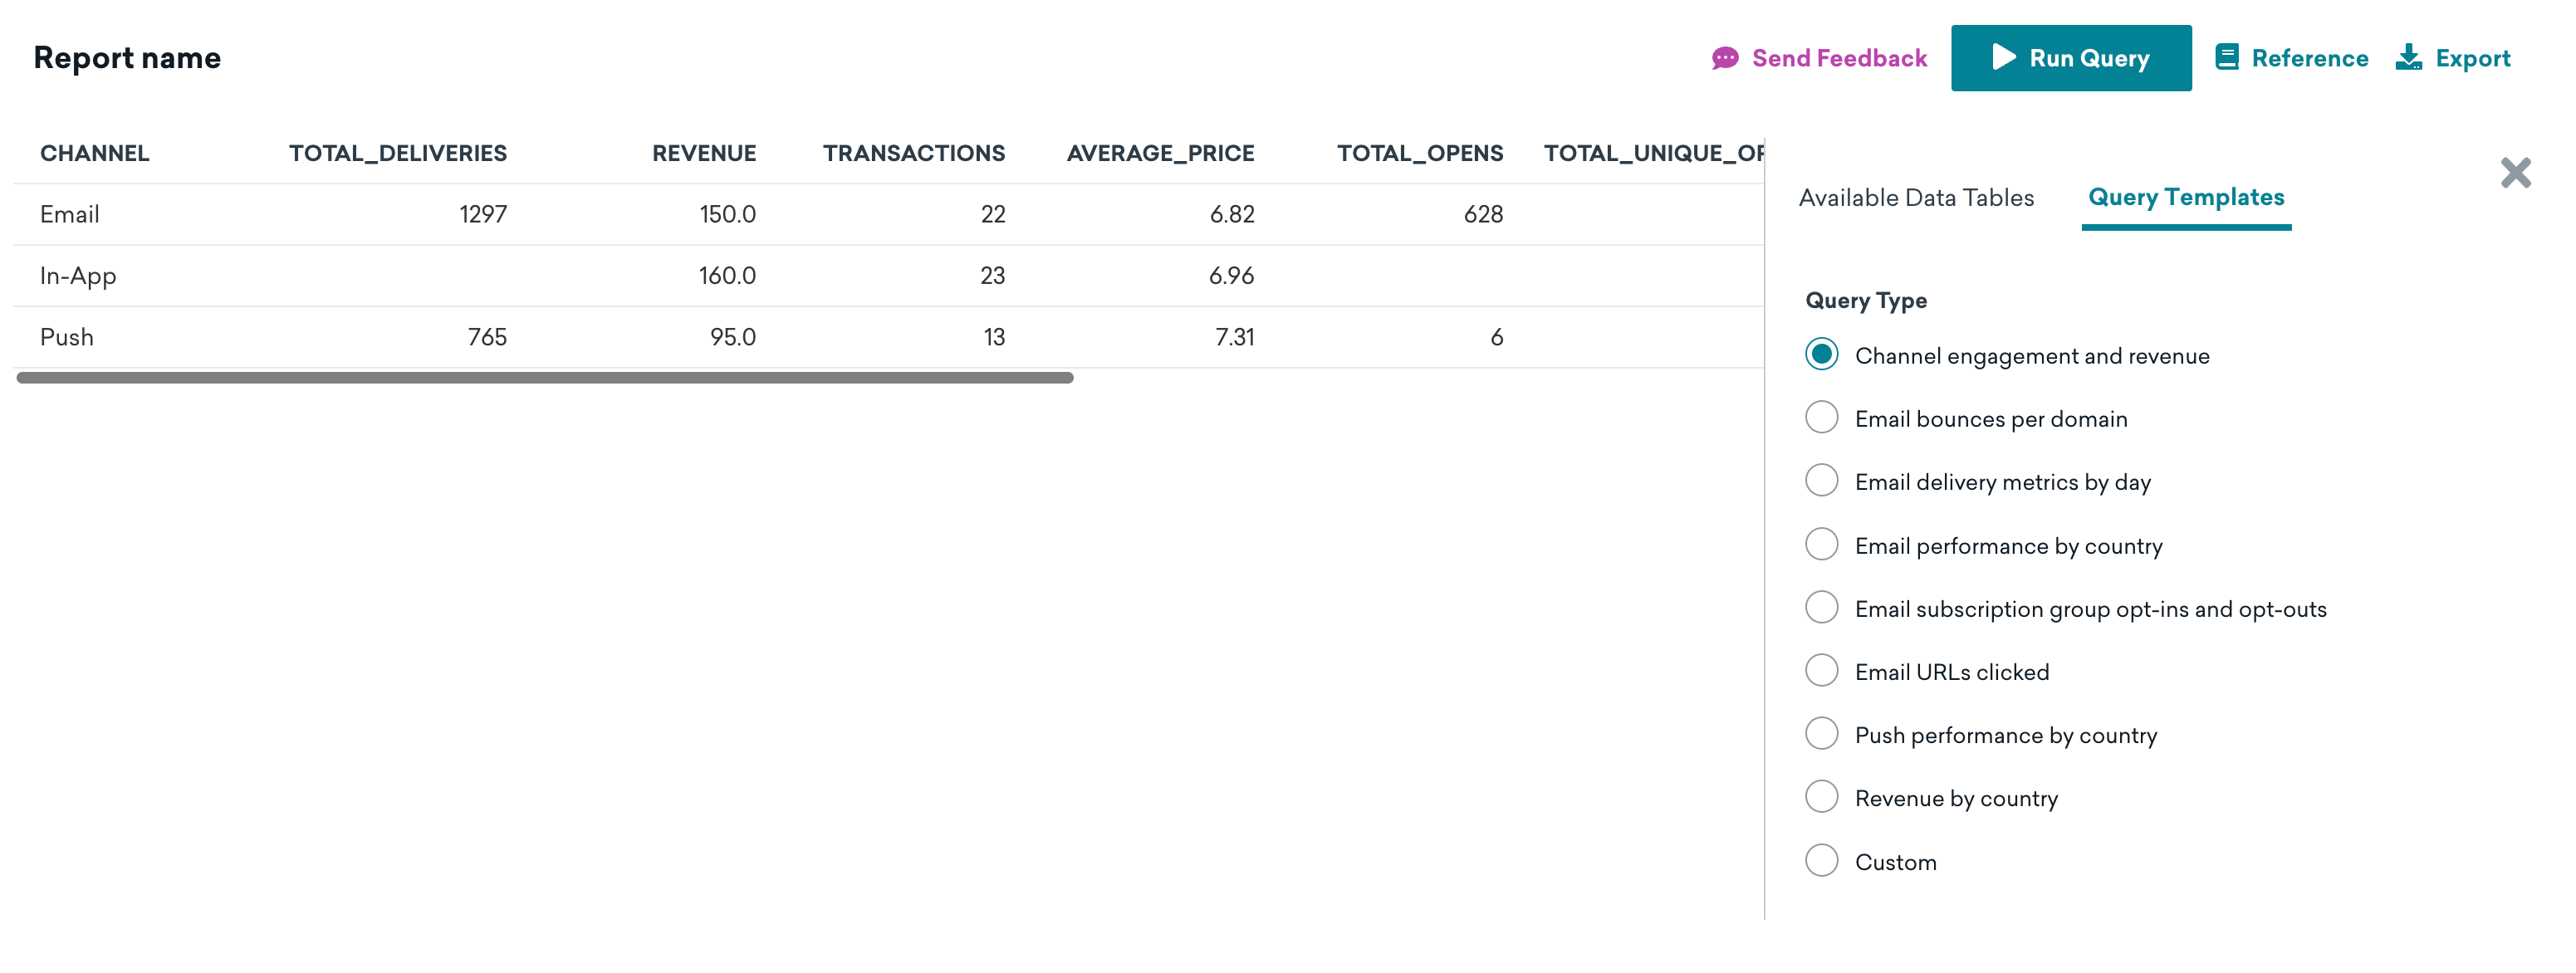 Query Builder showing the results for the templated query "Channel engagement and revenue for the last 60 days".